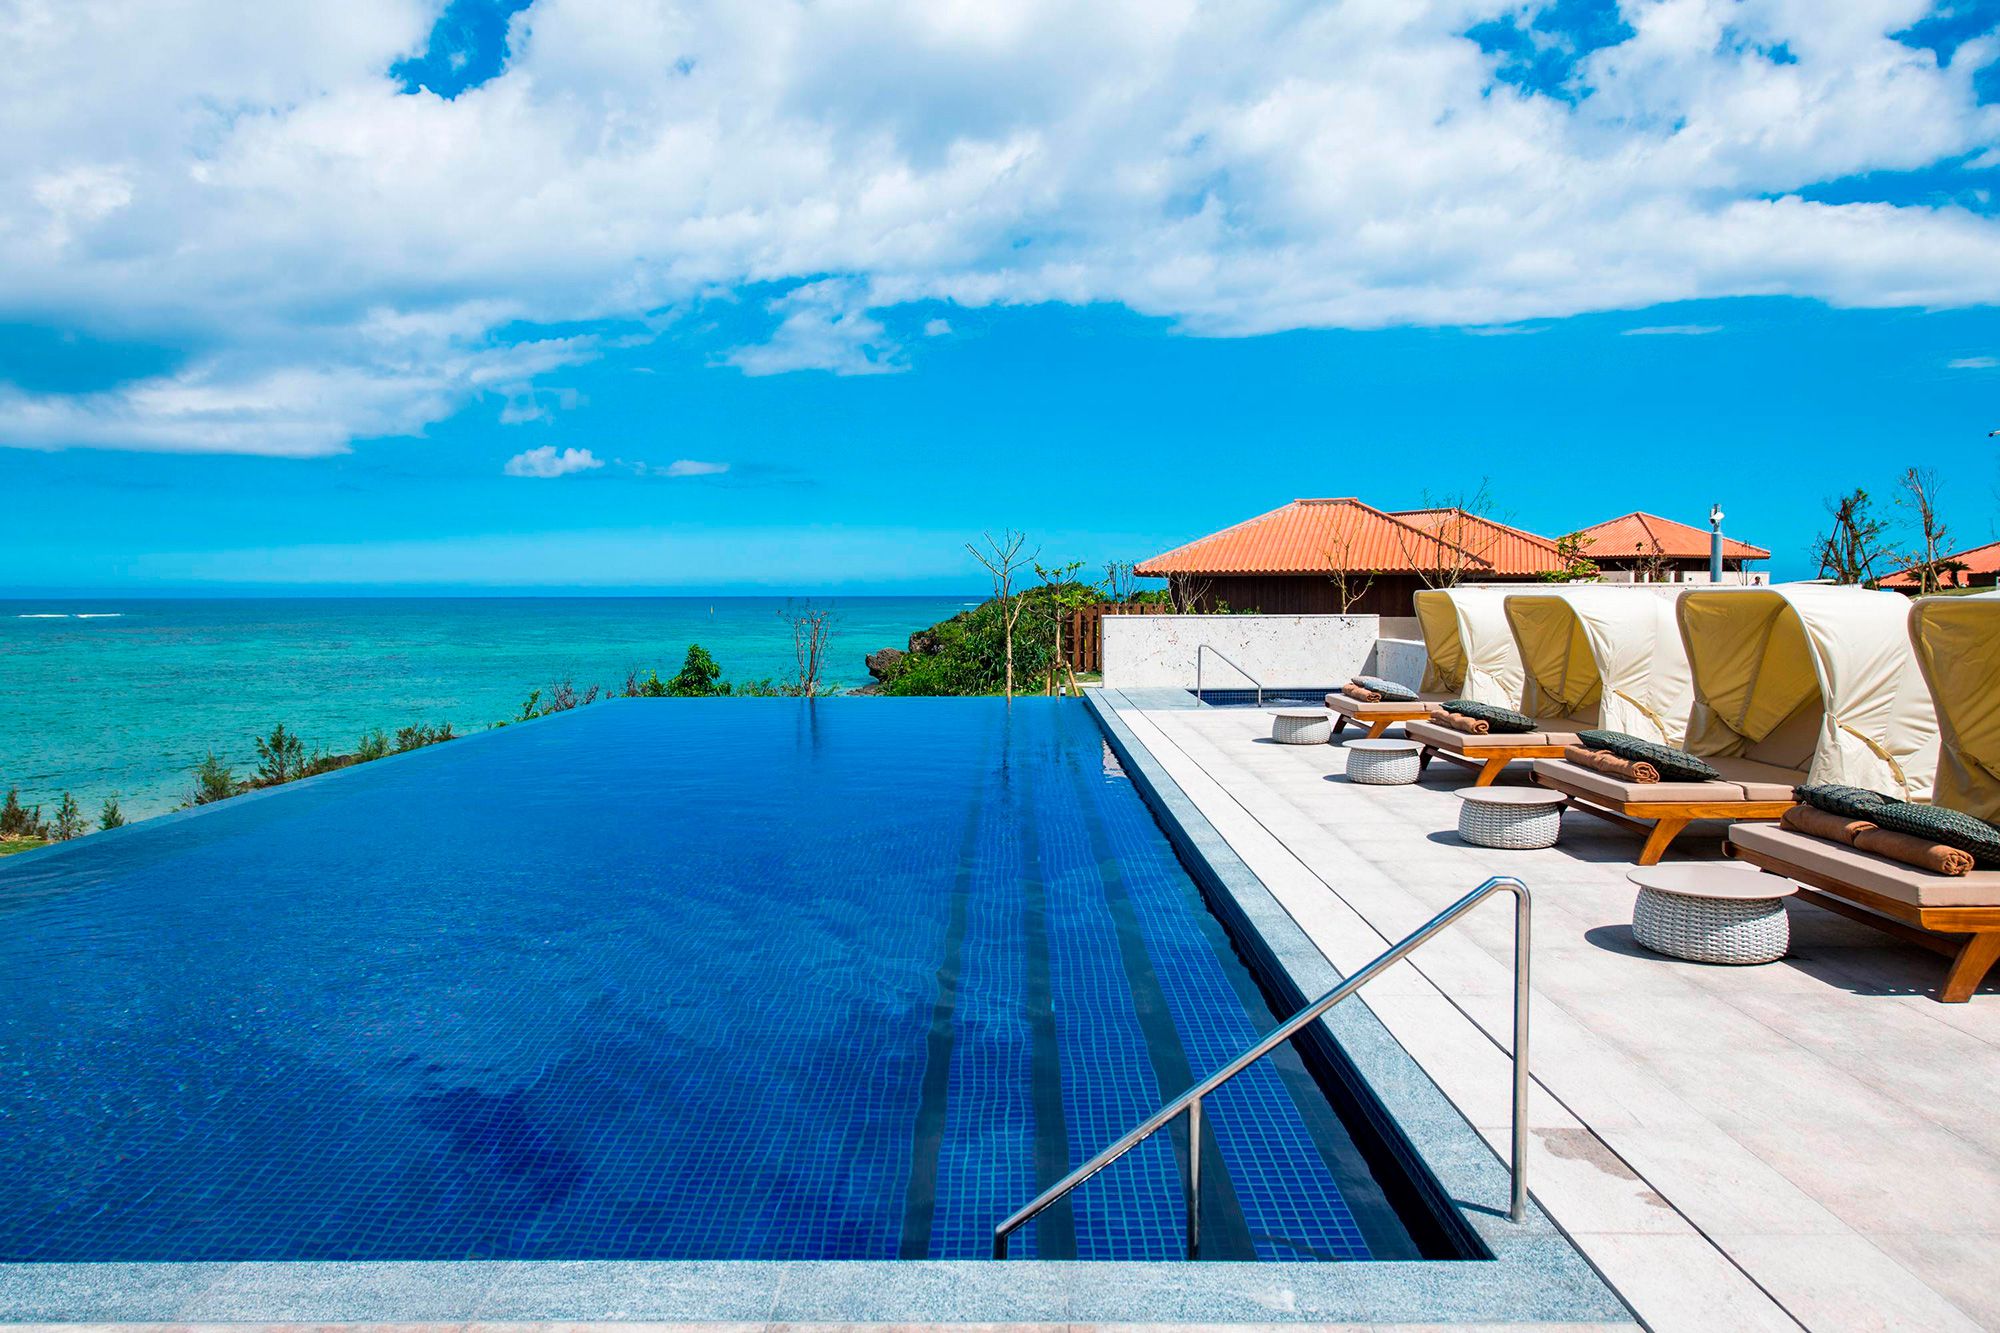 The magnificent scenery of the blending sky and ocean from the Ginoza Swimming Pool